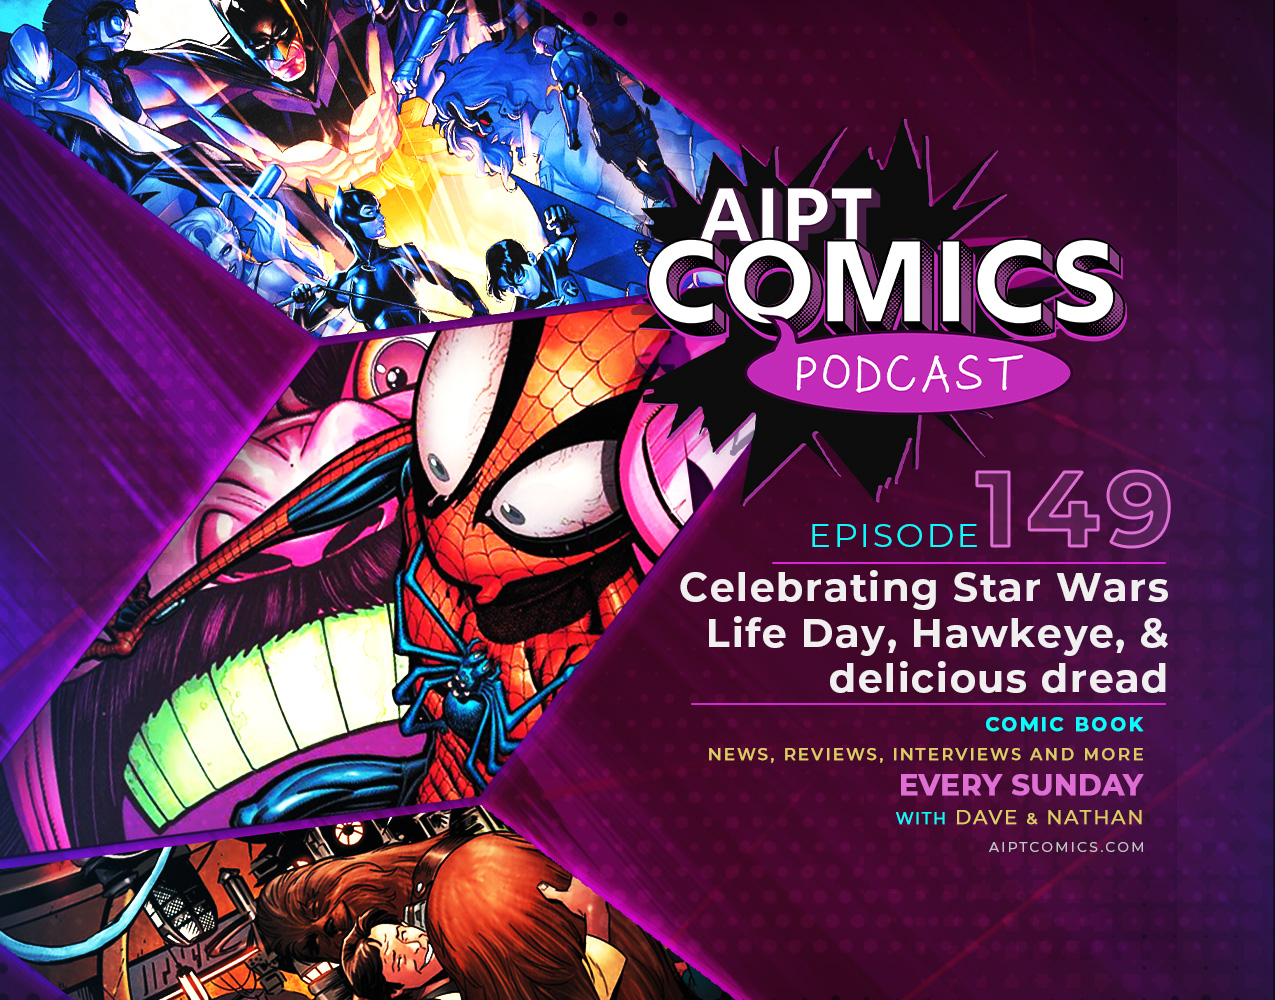 AIPT Comics Podcast episode 149: Celebrating Star Wars Life Day, Hawkeye, & delicious dread